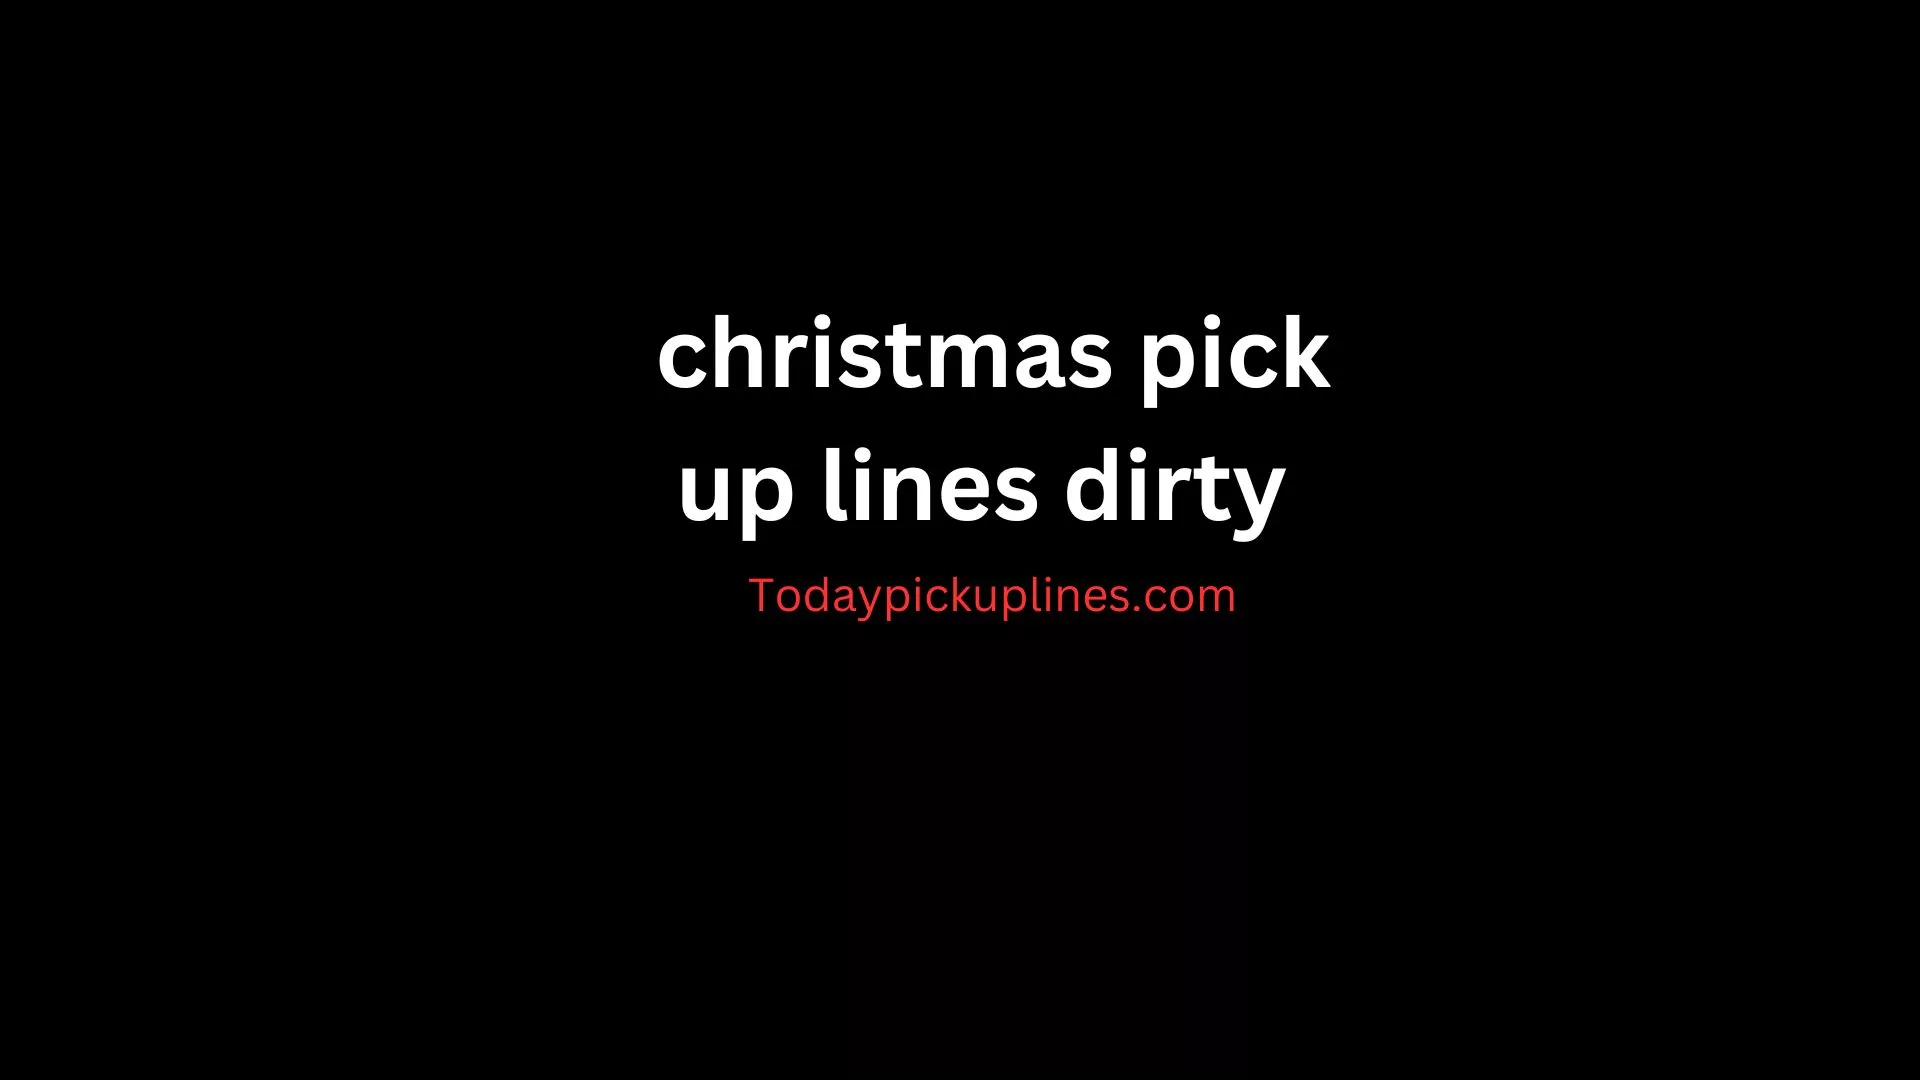 Christmas Pick Up Lines Dirty.webp